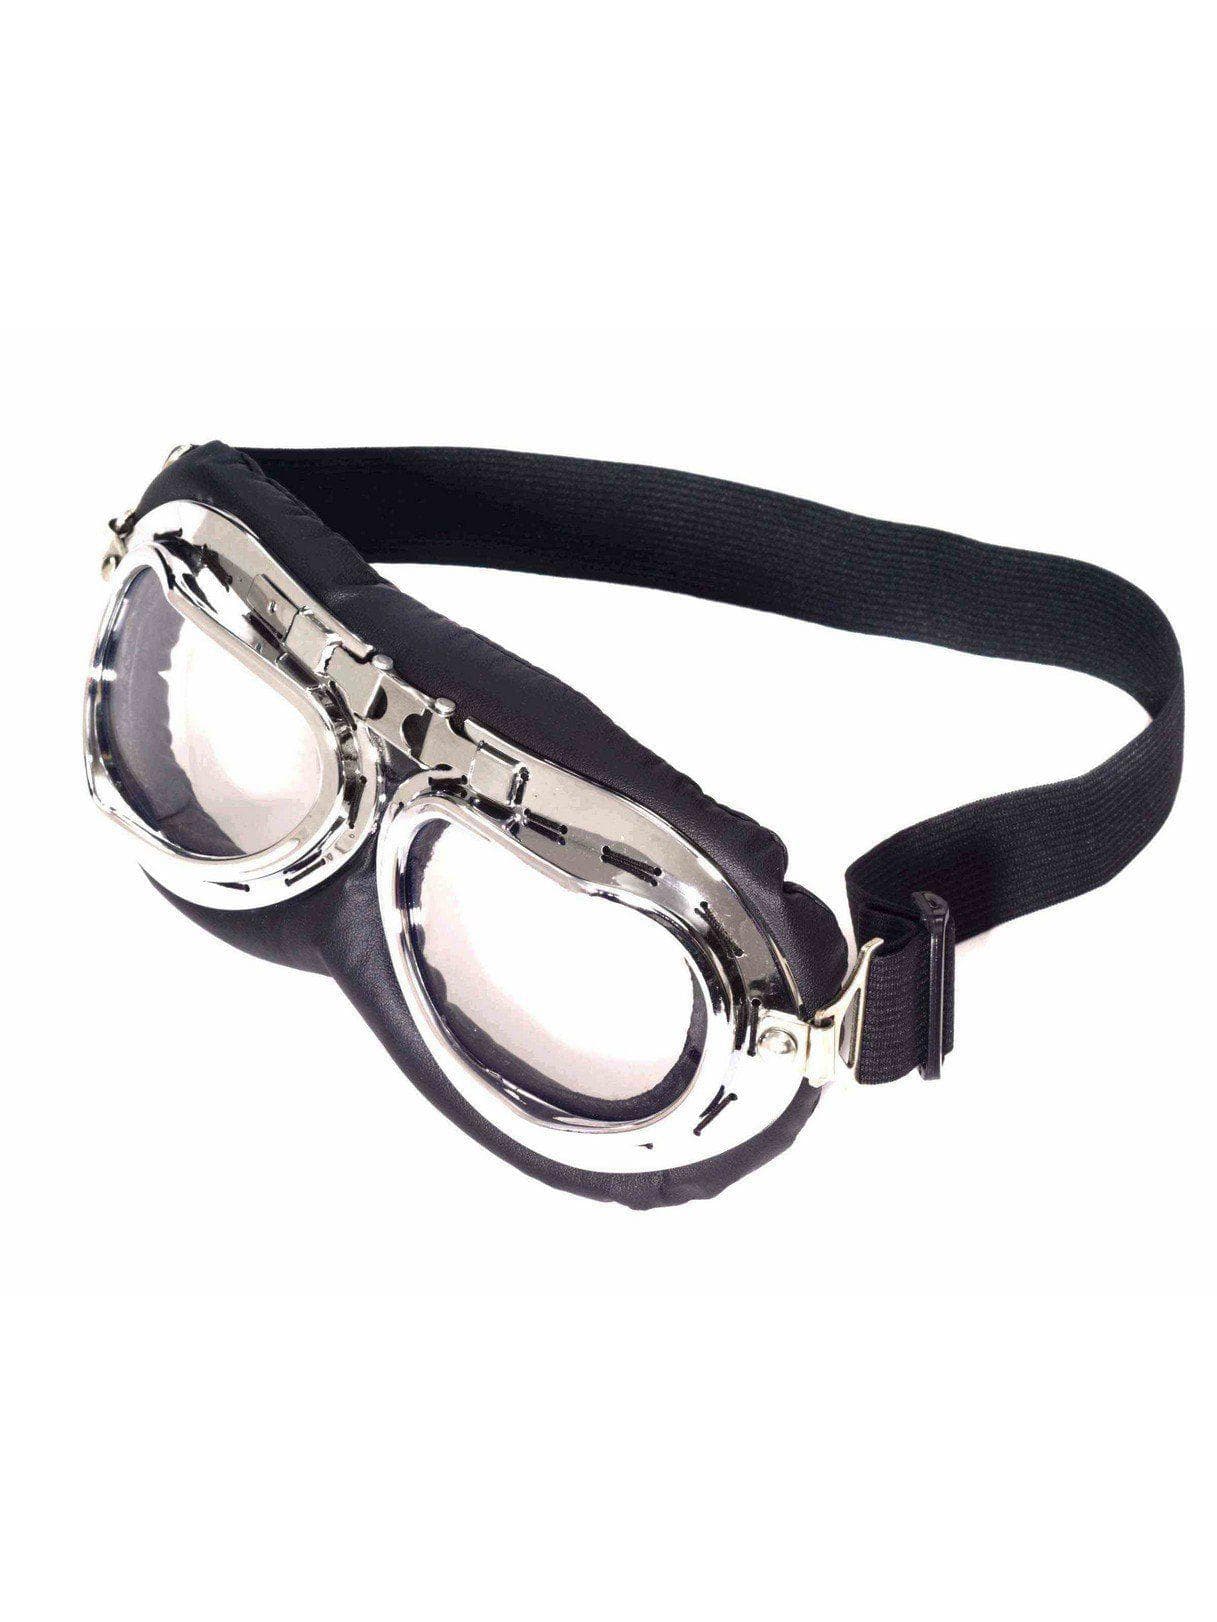 Adult Black and Silver Steampunk Aviator Goggles - costumes.com